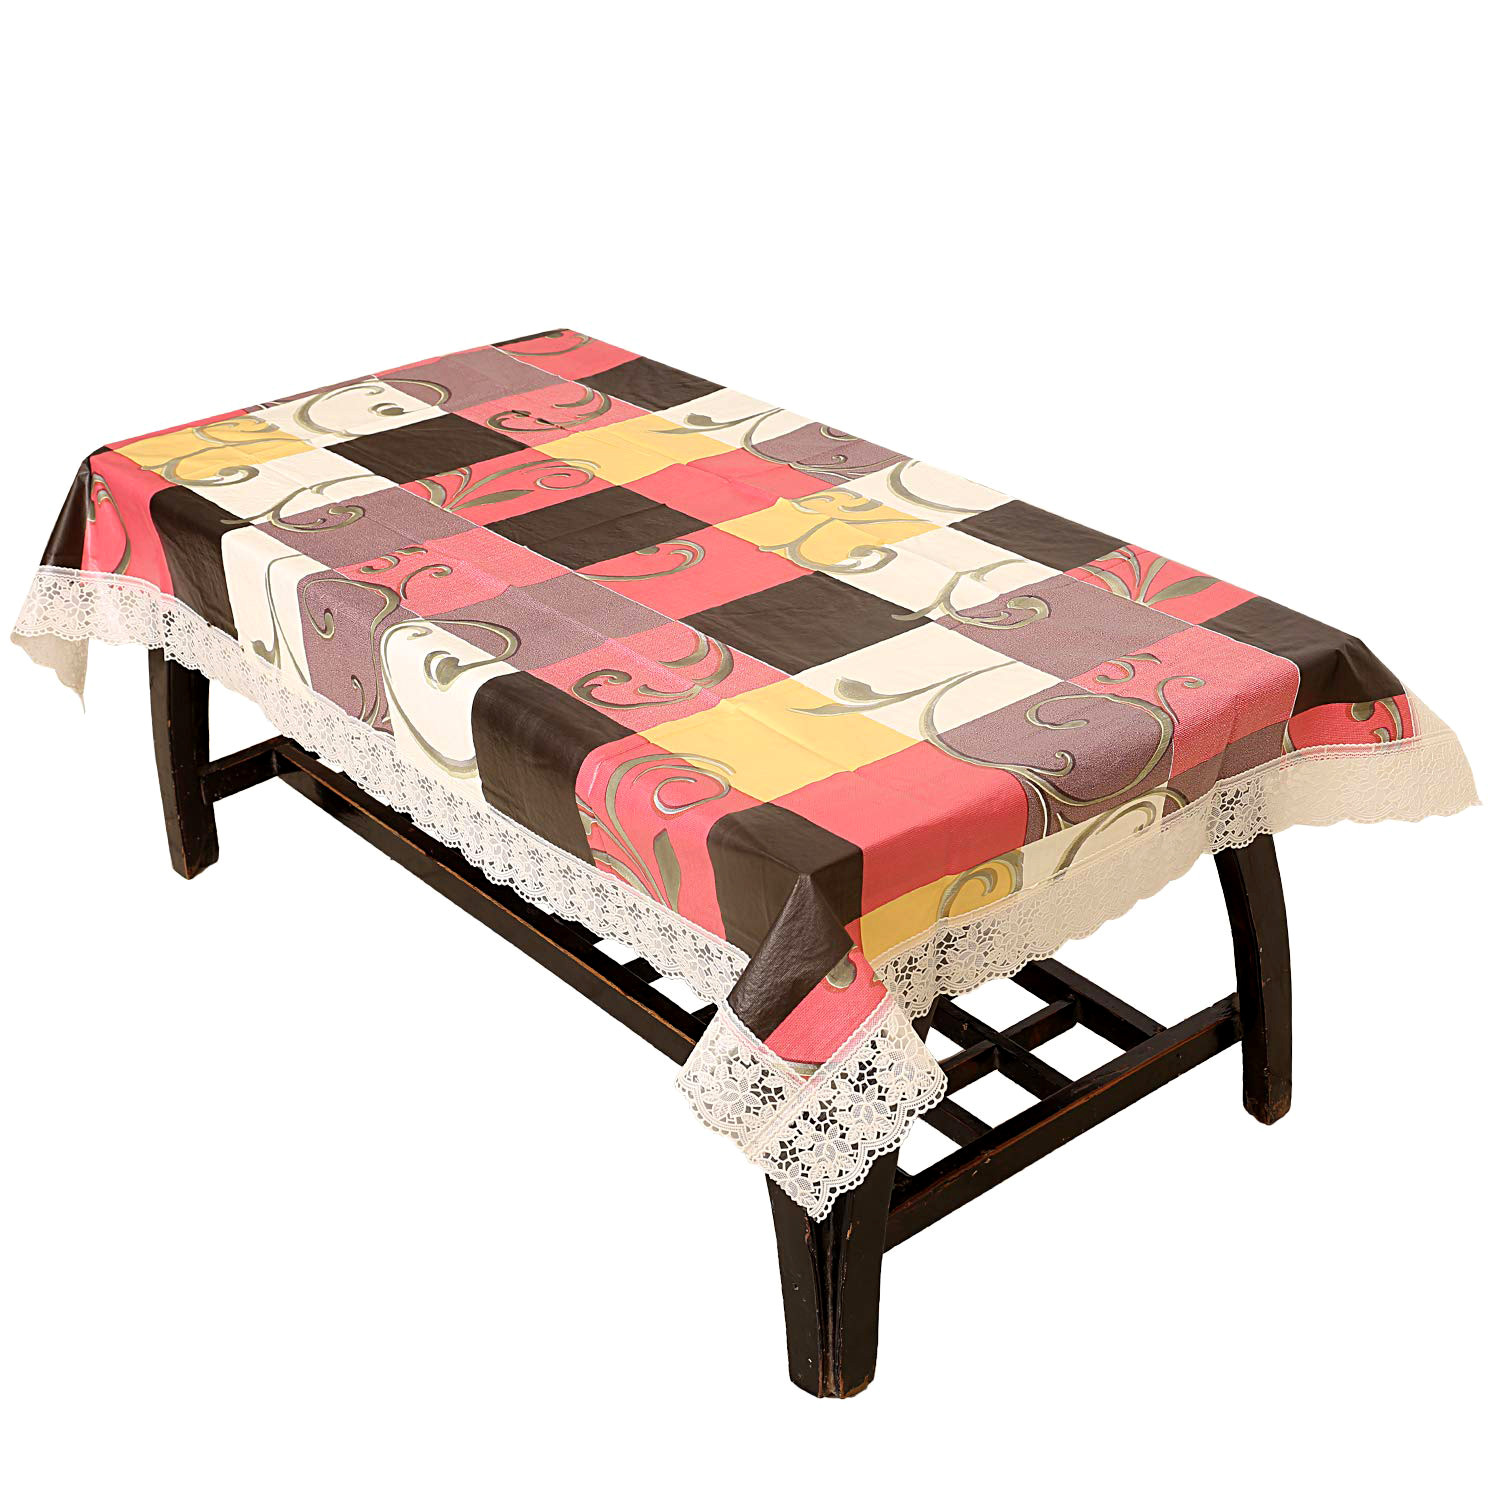 Kuber Industries Checked Design PVC 4 Seater Center Table Cover 40